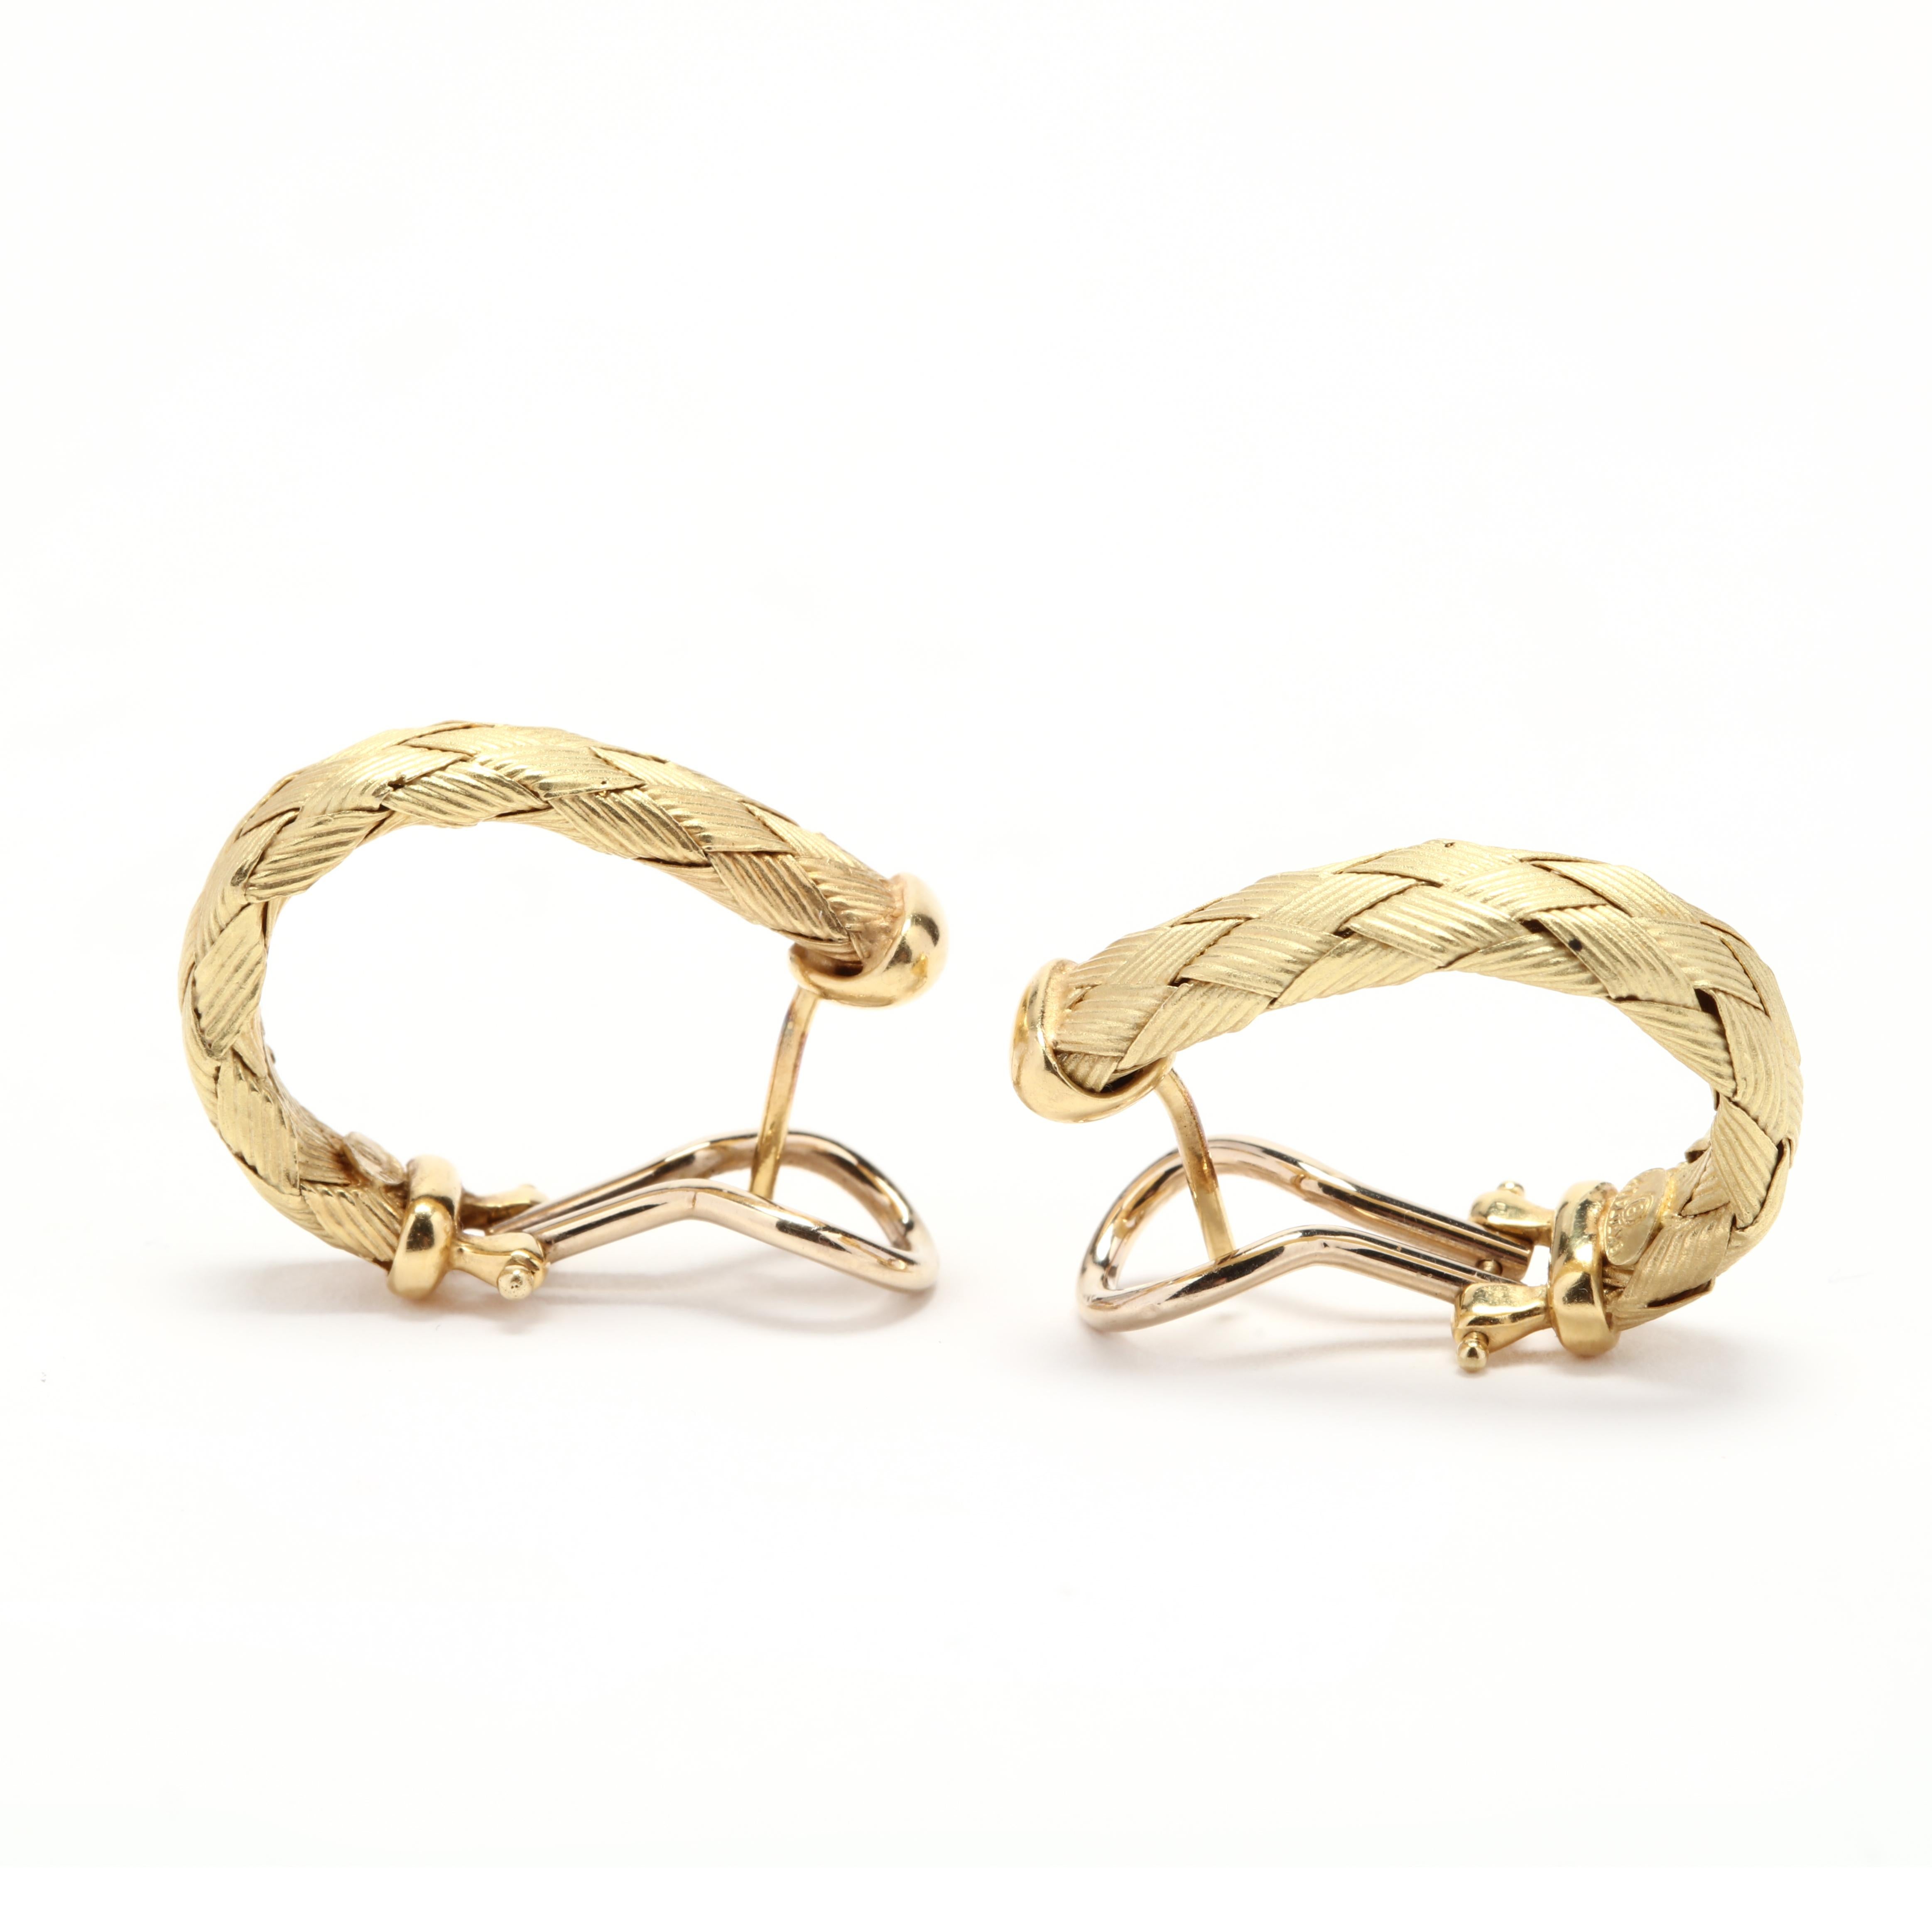 A pair of Italian 18 karat yellow gold woven hoop earrings. These earrings feature woven gold in a 'J' hoop design with pierced omega backs.

Length: 24 mm

Width: 5.5 mm

4.9 dwts.

* Please note that this is a vintage item and may show signs of